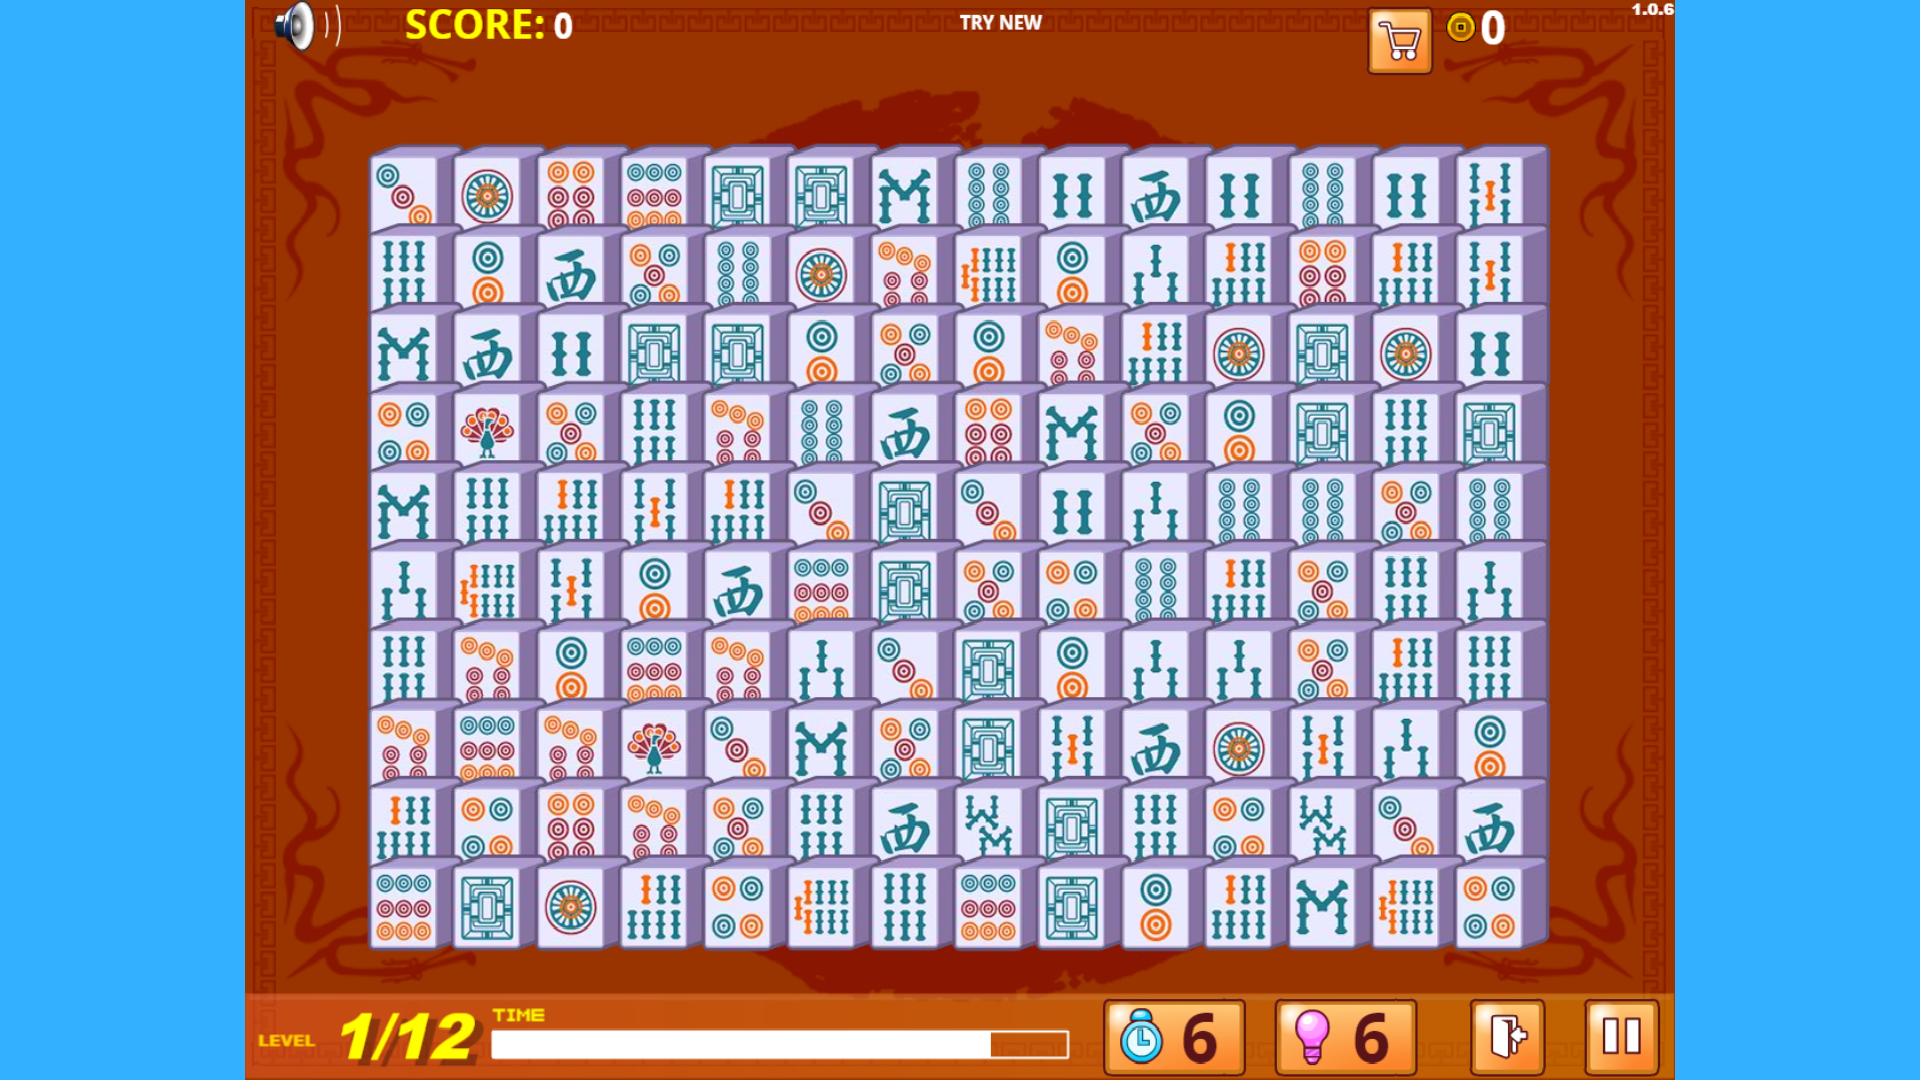 Puno Relaxing build up Mahjong Connect Deluxe — play online for free on Yandex Games